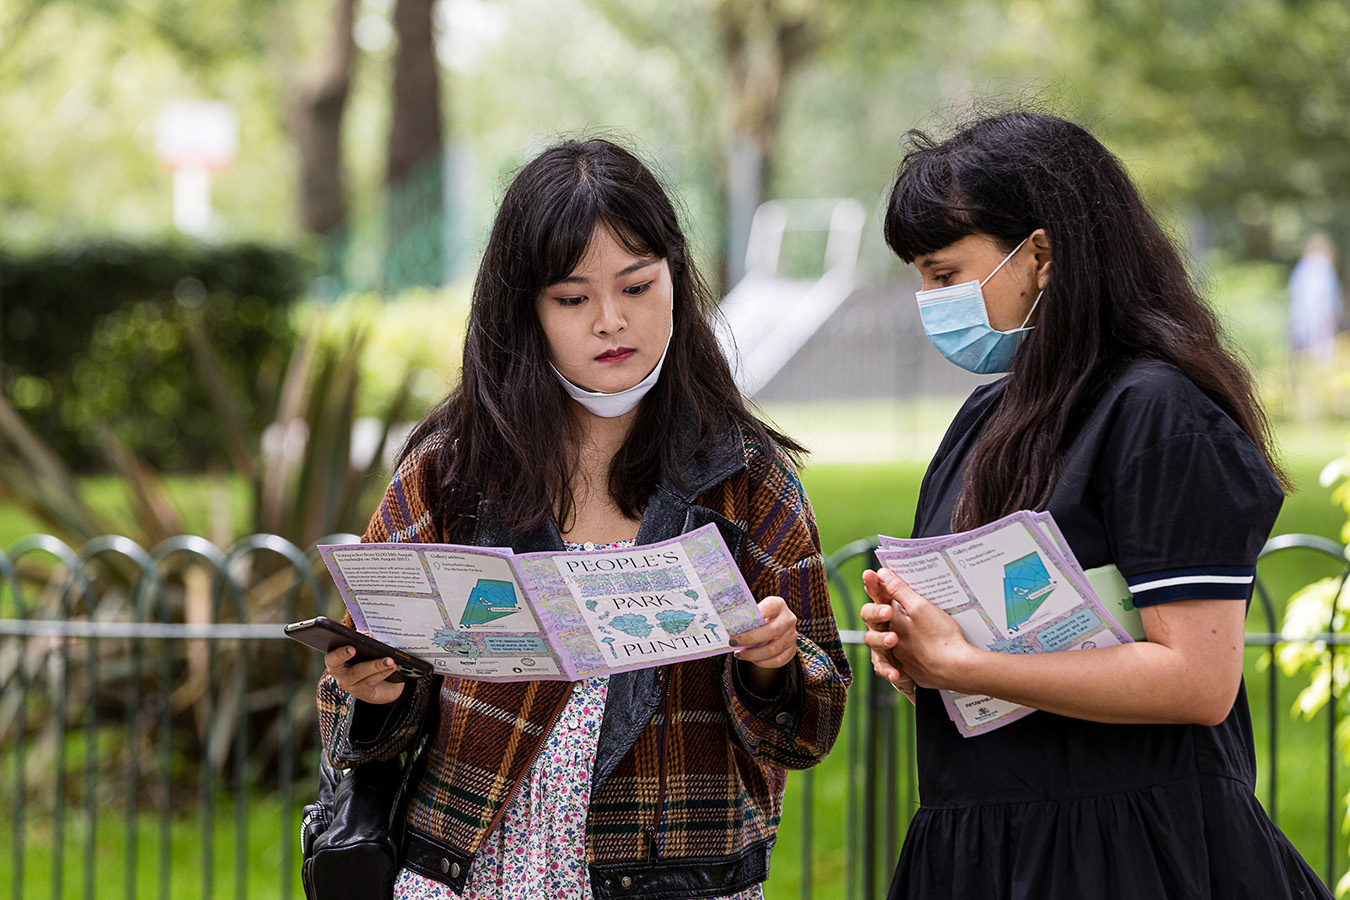 two girls reading the People's Park Plinth booklet in the park